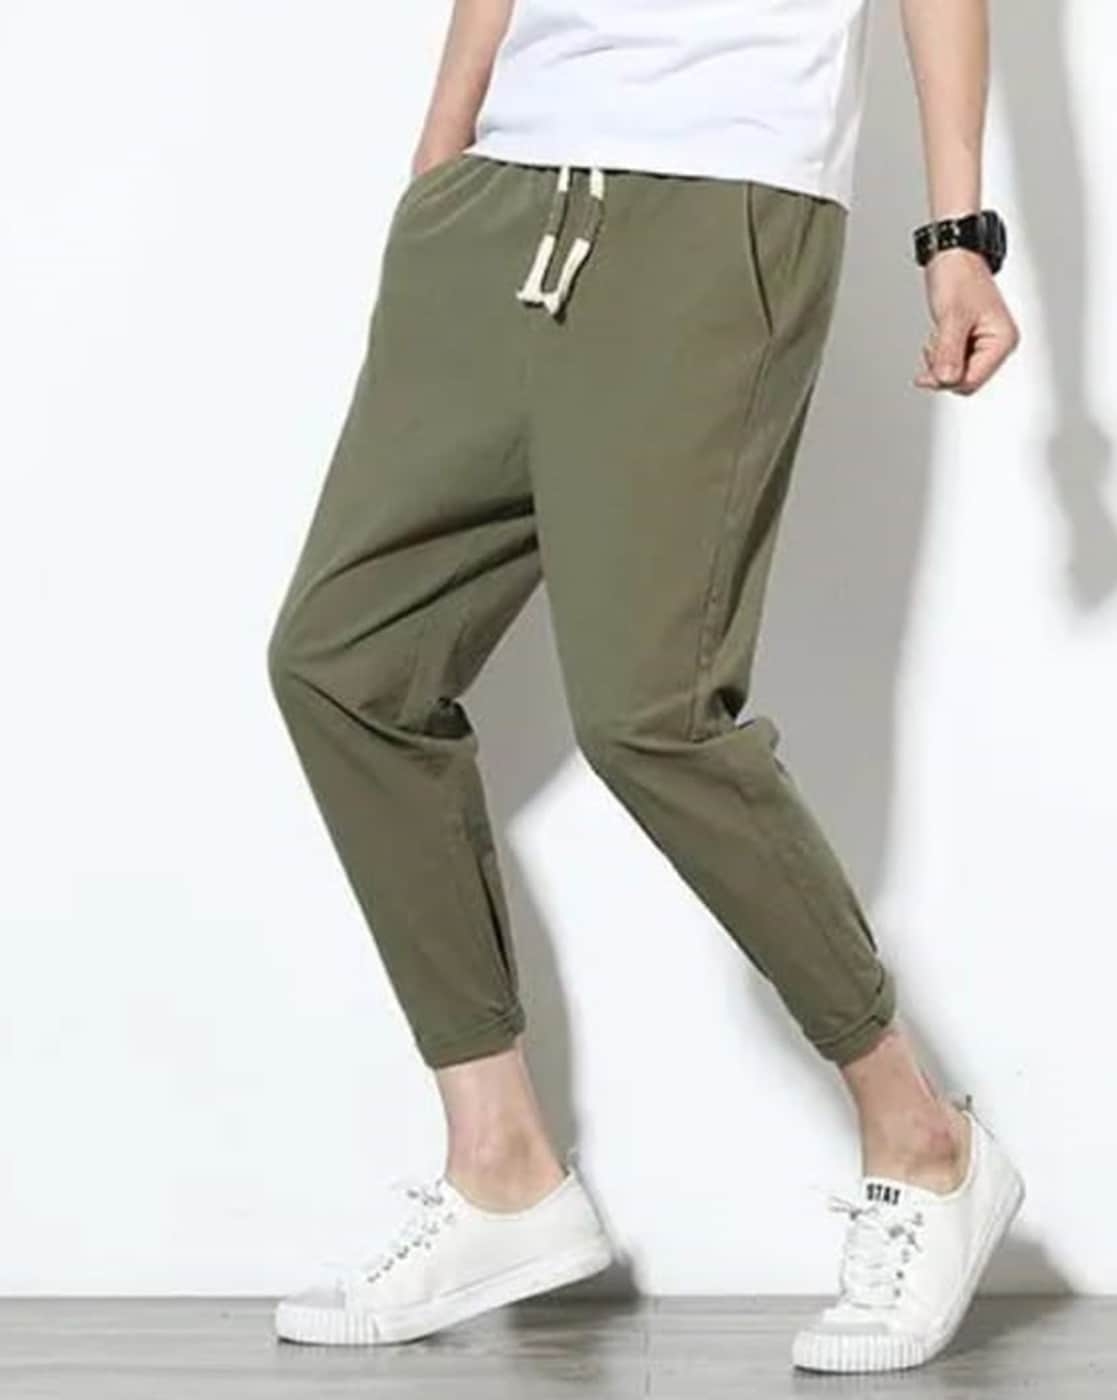 Heathex Men's Solid Olive Stretchable Elasticated Waist Track Pants with Insert Pocket